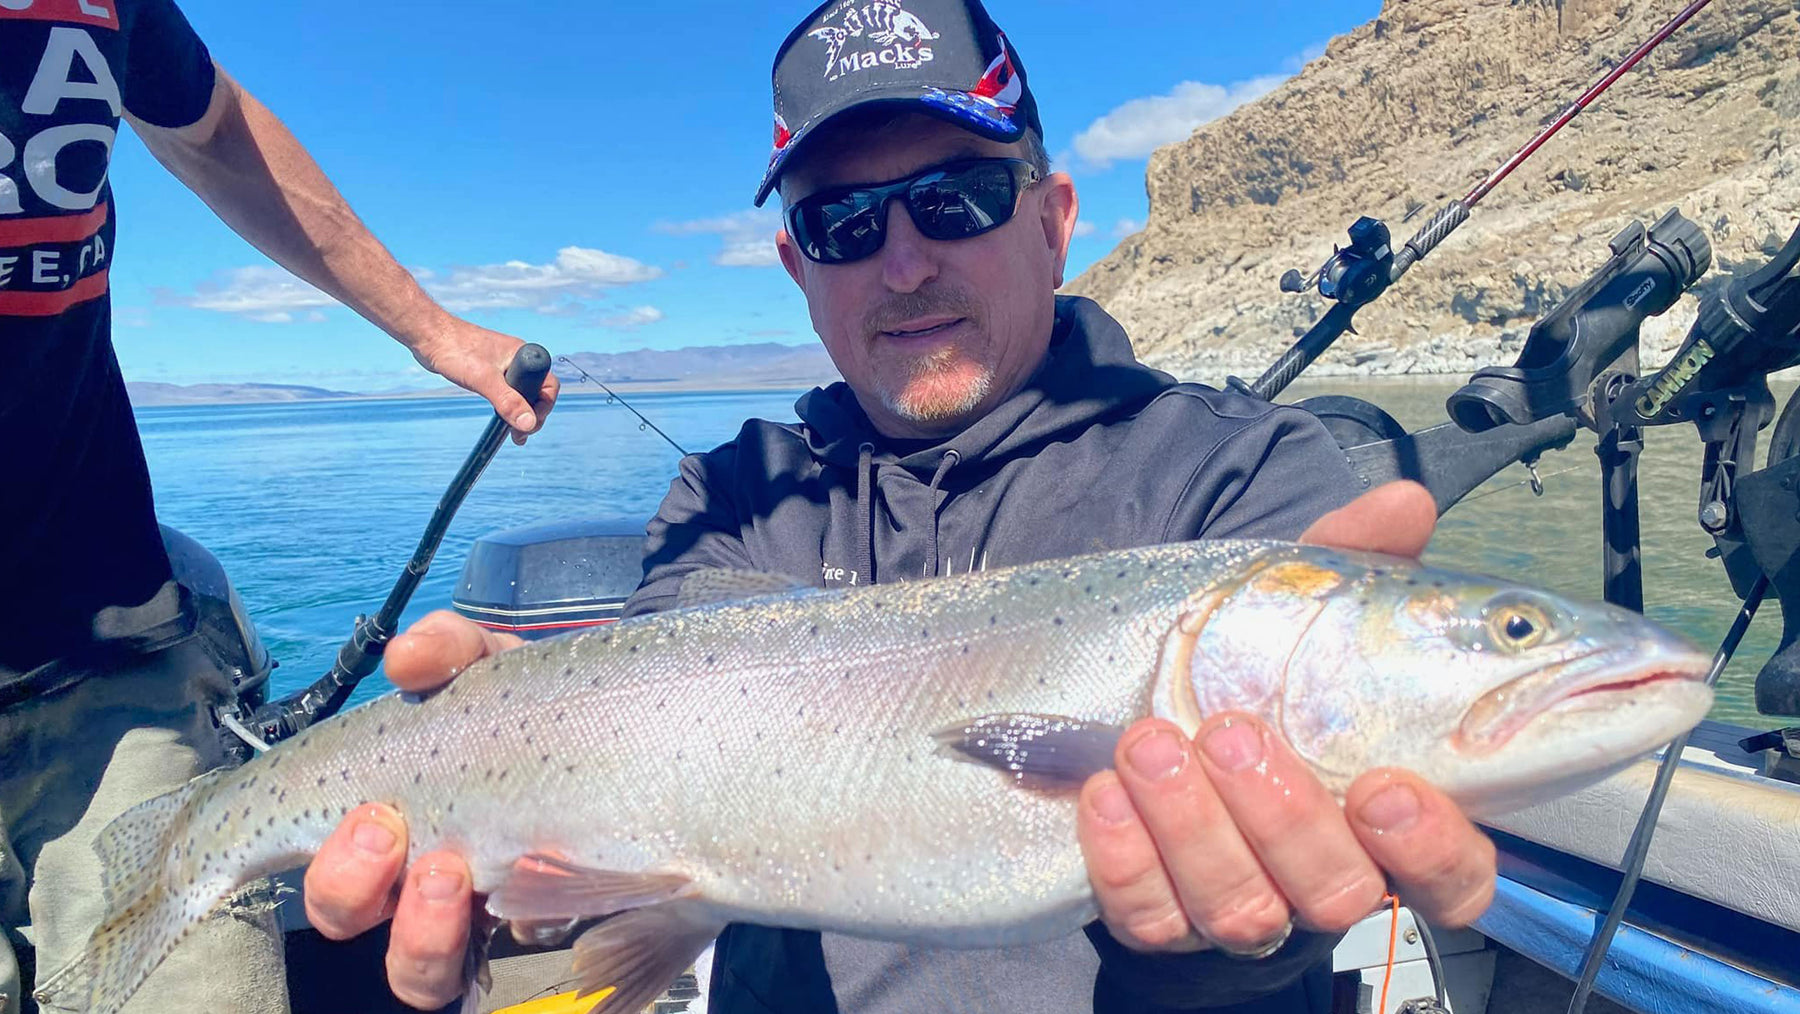 Trolling for Trout, Kokanee and Salmon in California Lakes